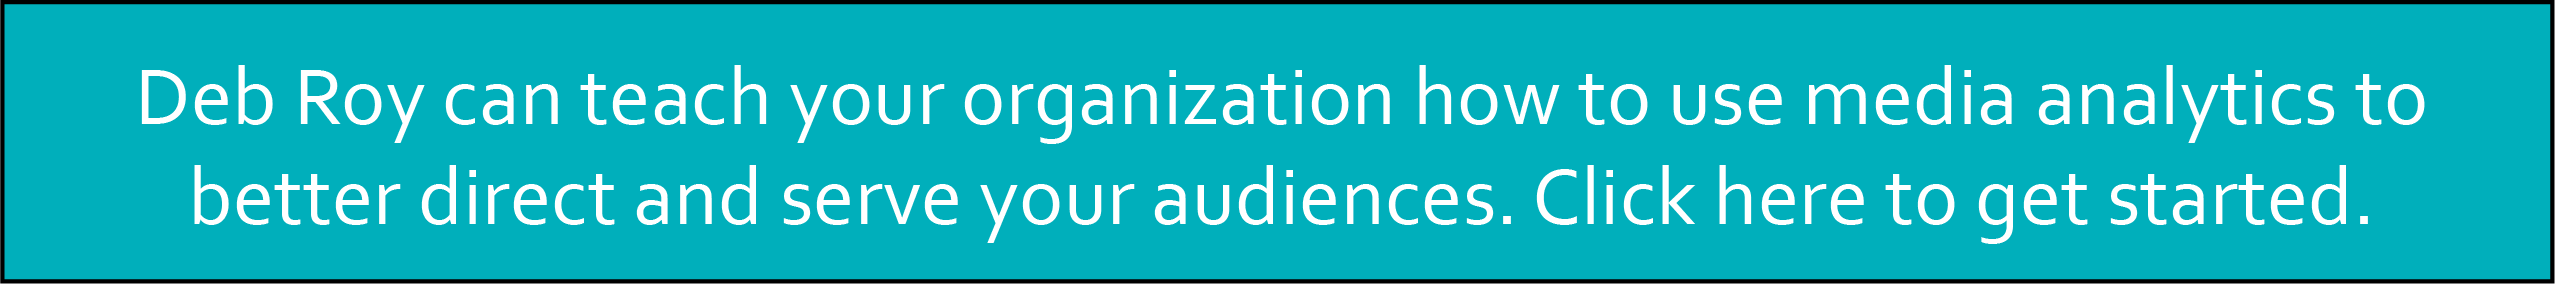 Deb Roy can teach your organization how to use media analytics to better direct and serve your audiences. Click here to get started. 